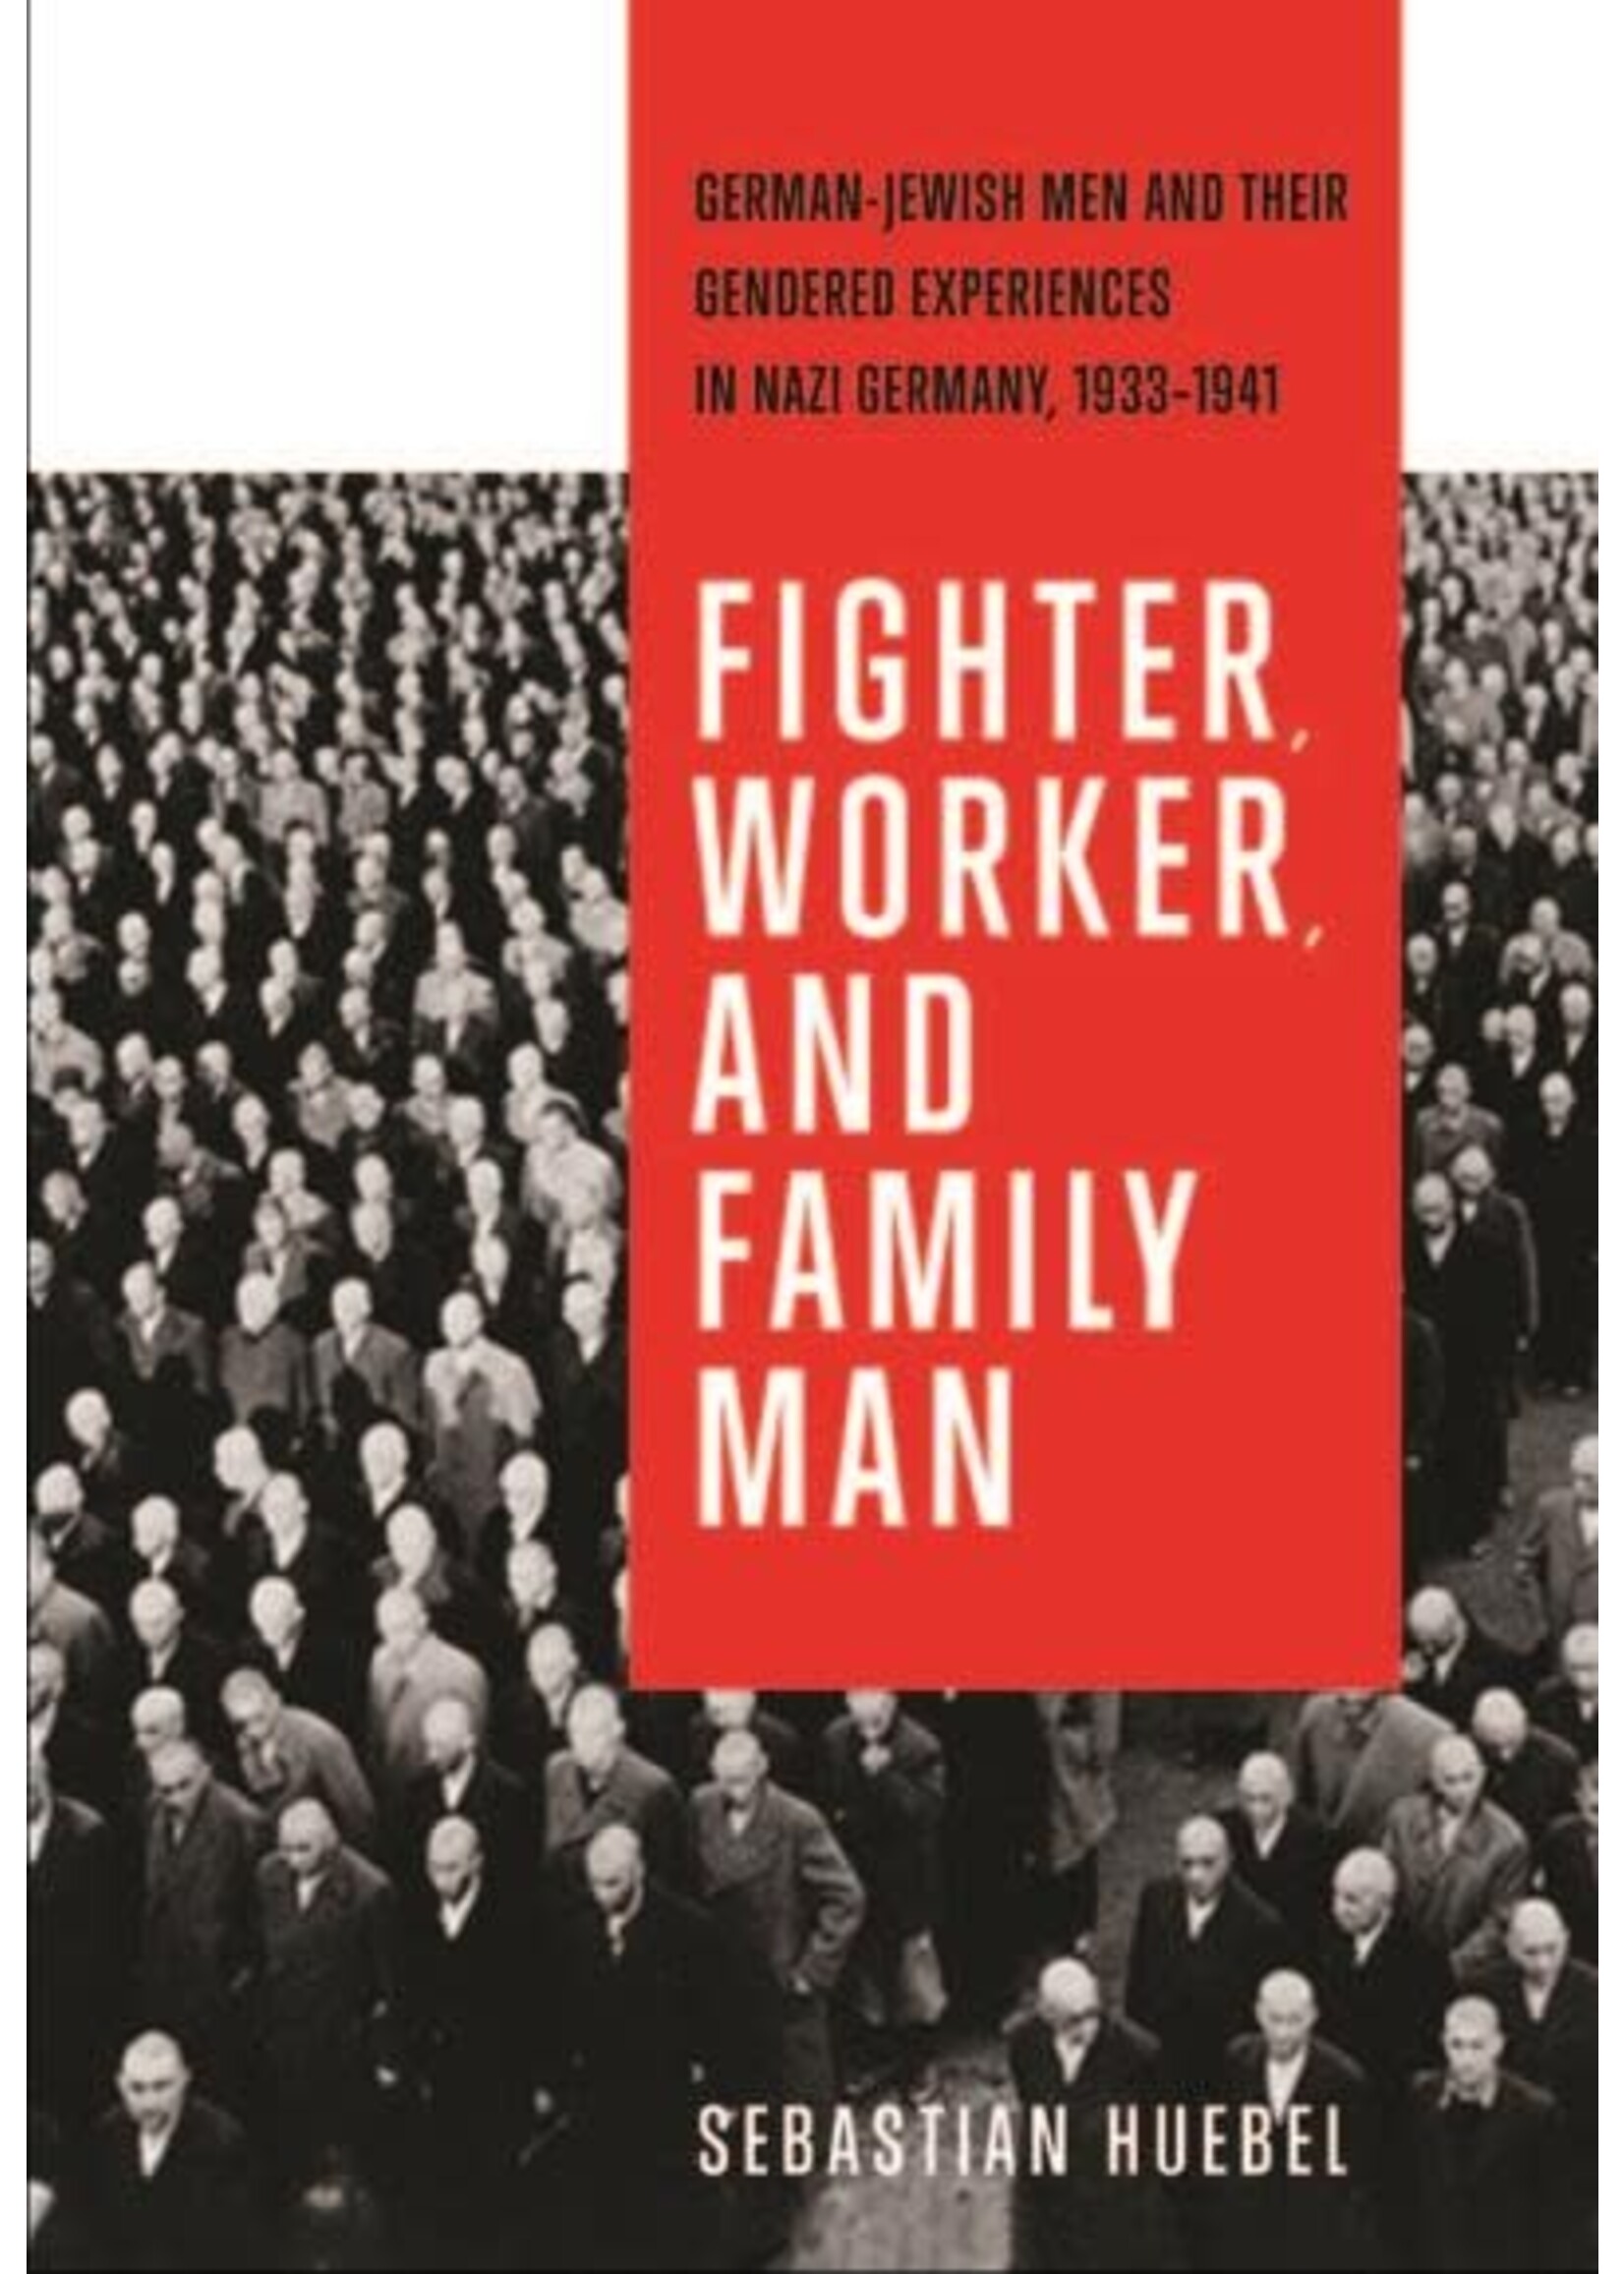 Fighter, Worker, and Family Man: German-Jewish Men and Their Gendered Experiences in Nazi Germany, 1933-1941 by Sebastian Huebel